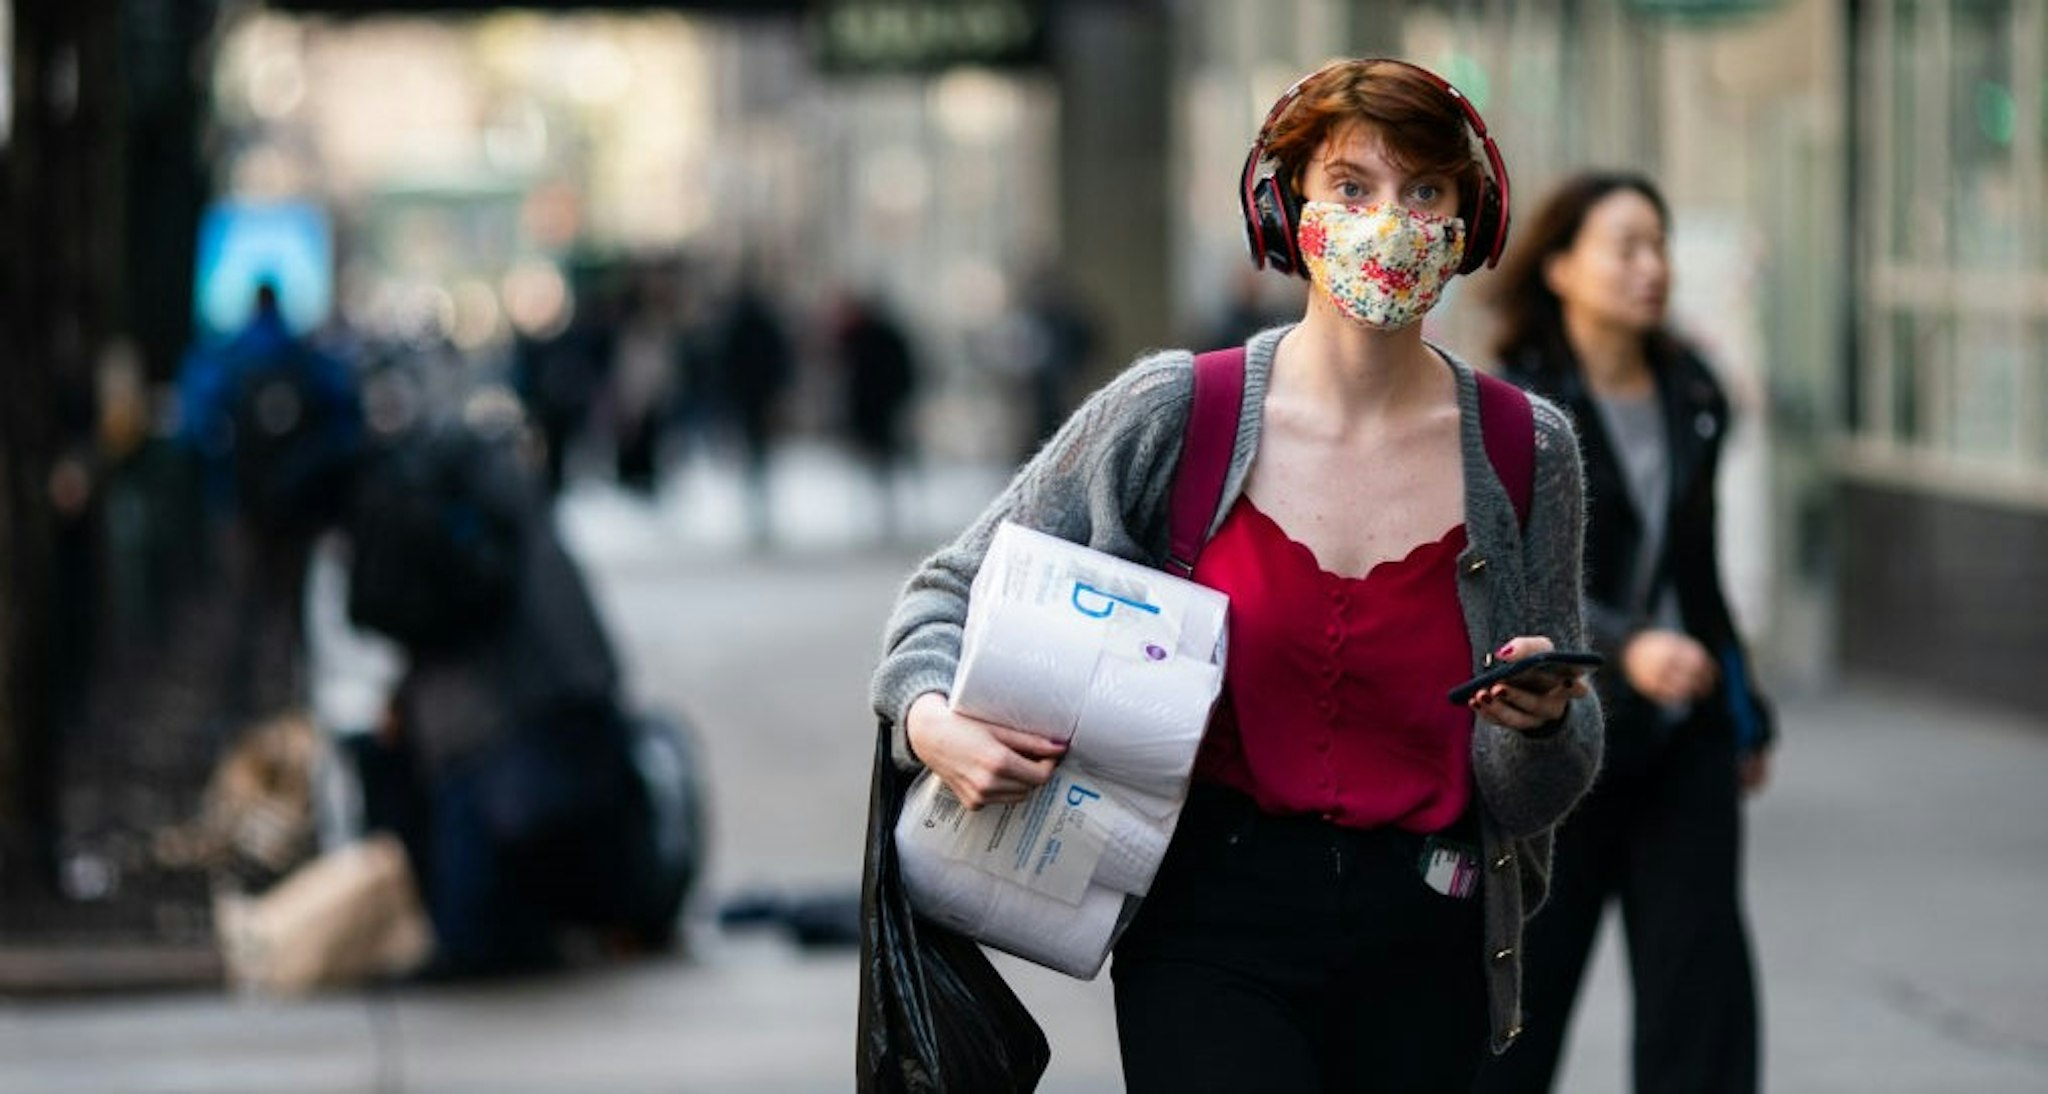 NEW YORK, NY - MARCH 13: A woman wearing a protective mask carries a toilet paper package on the street on March 13, 2020 in New York City. President Donald Trump is expected to declare national emergency over coronavirus crisis today. There are at least 95 confirmed cases in New York City. (Photo by